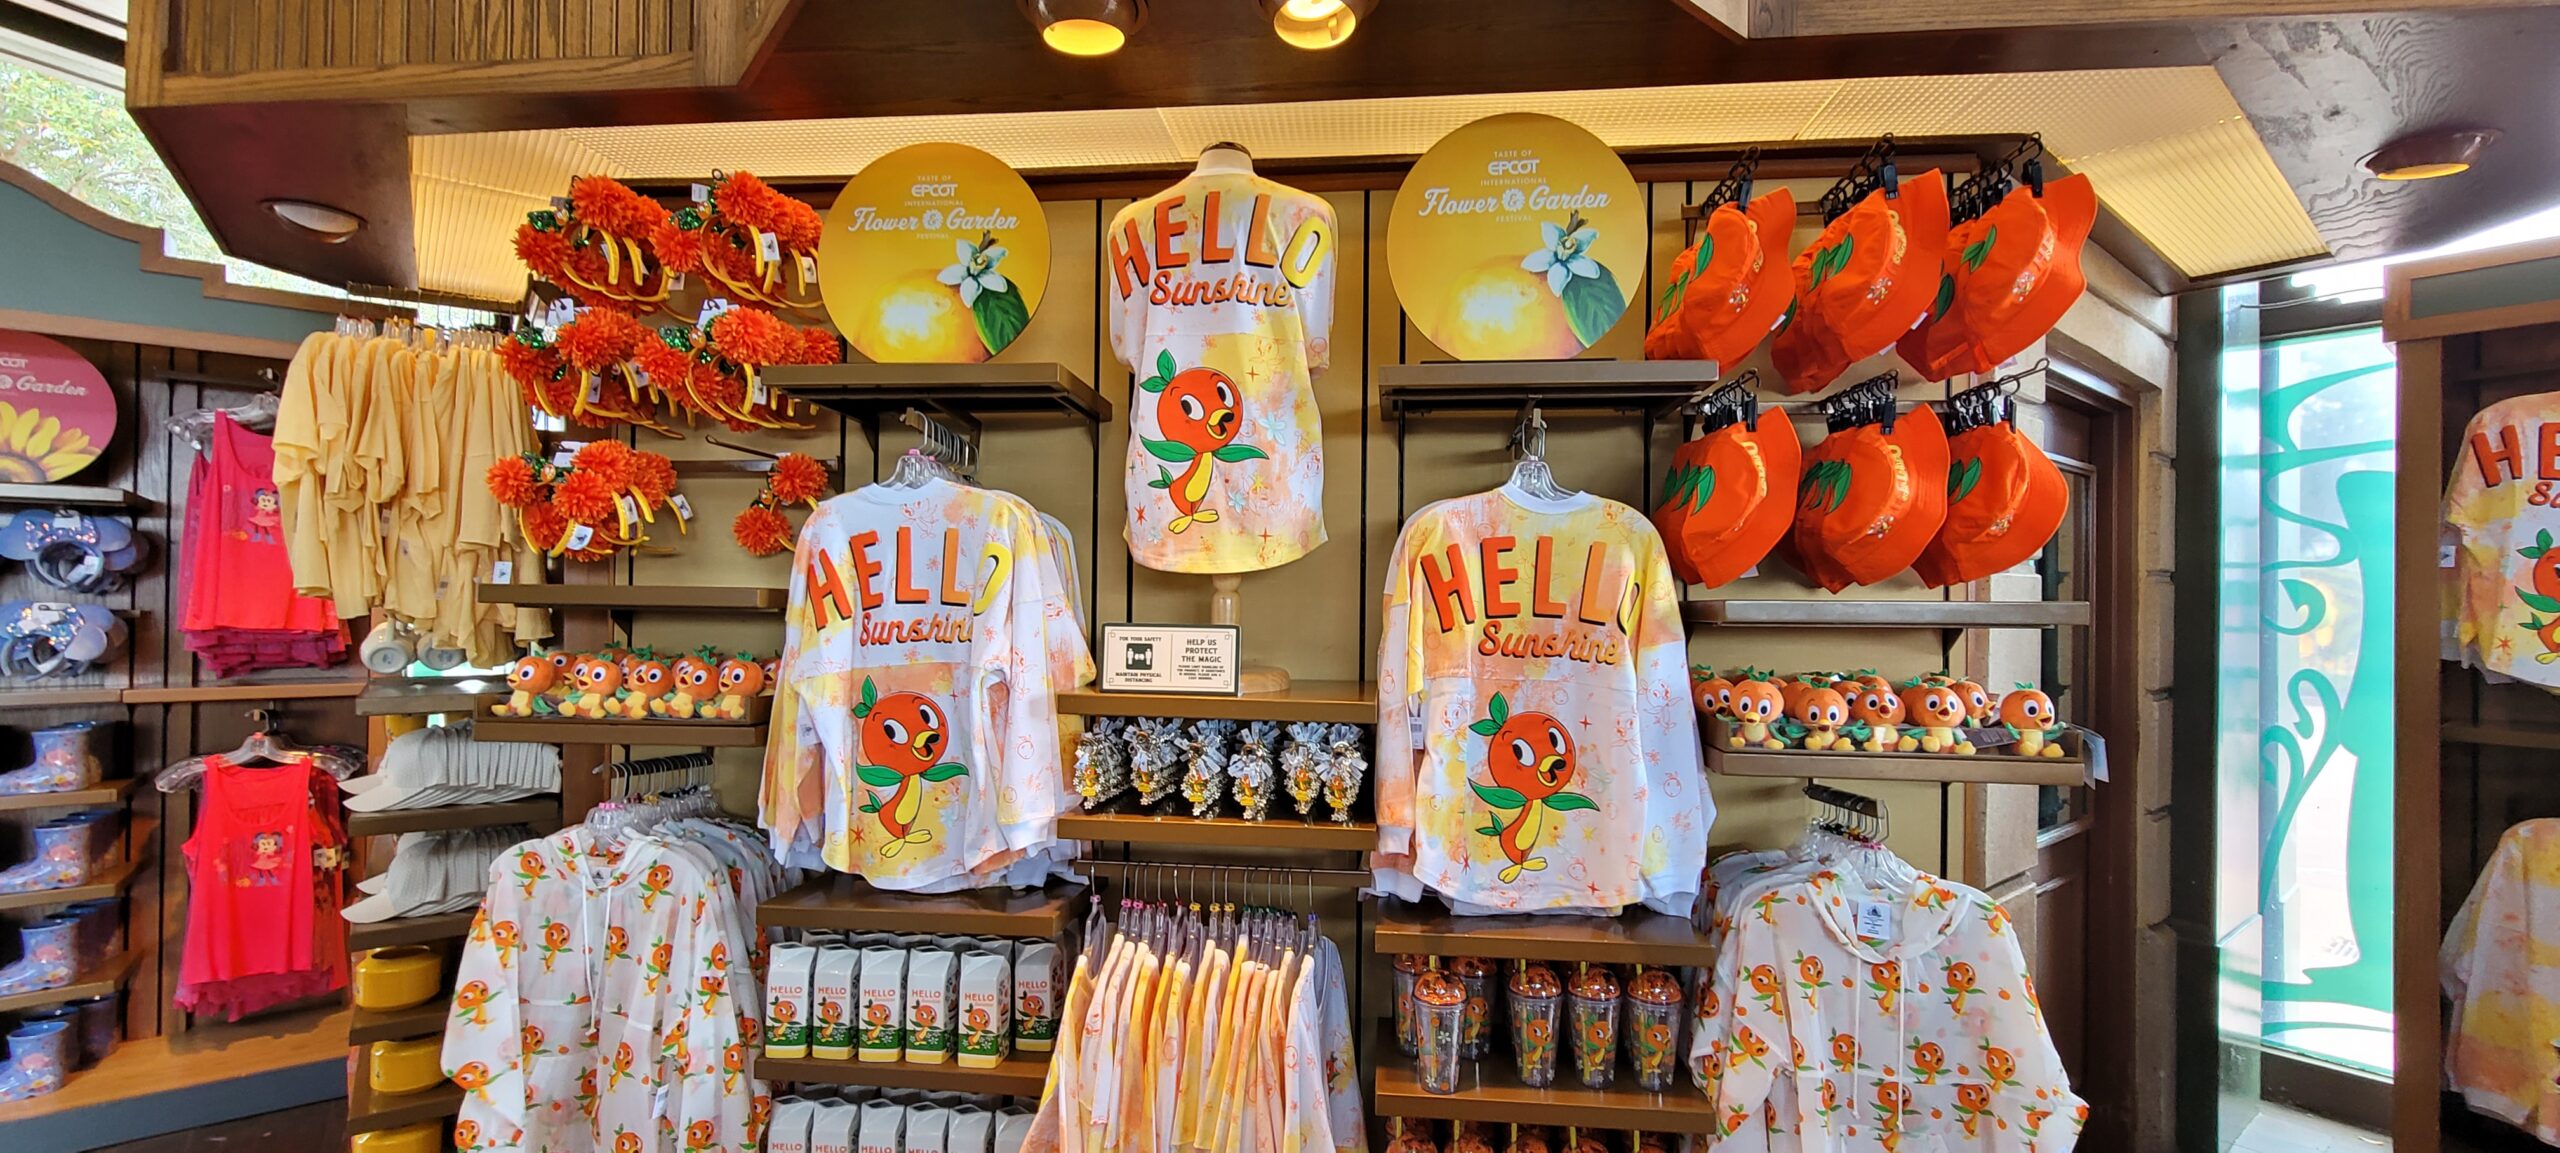 First Look At The 2021 Epcot Flower And Garden Festival Merchandise